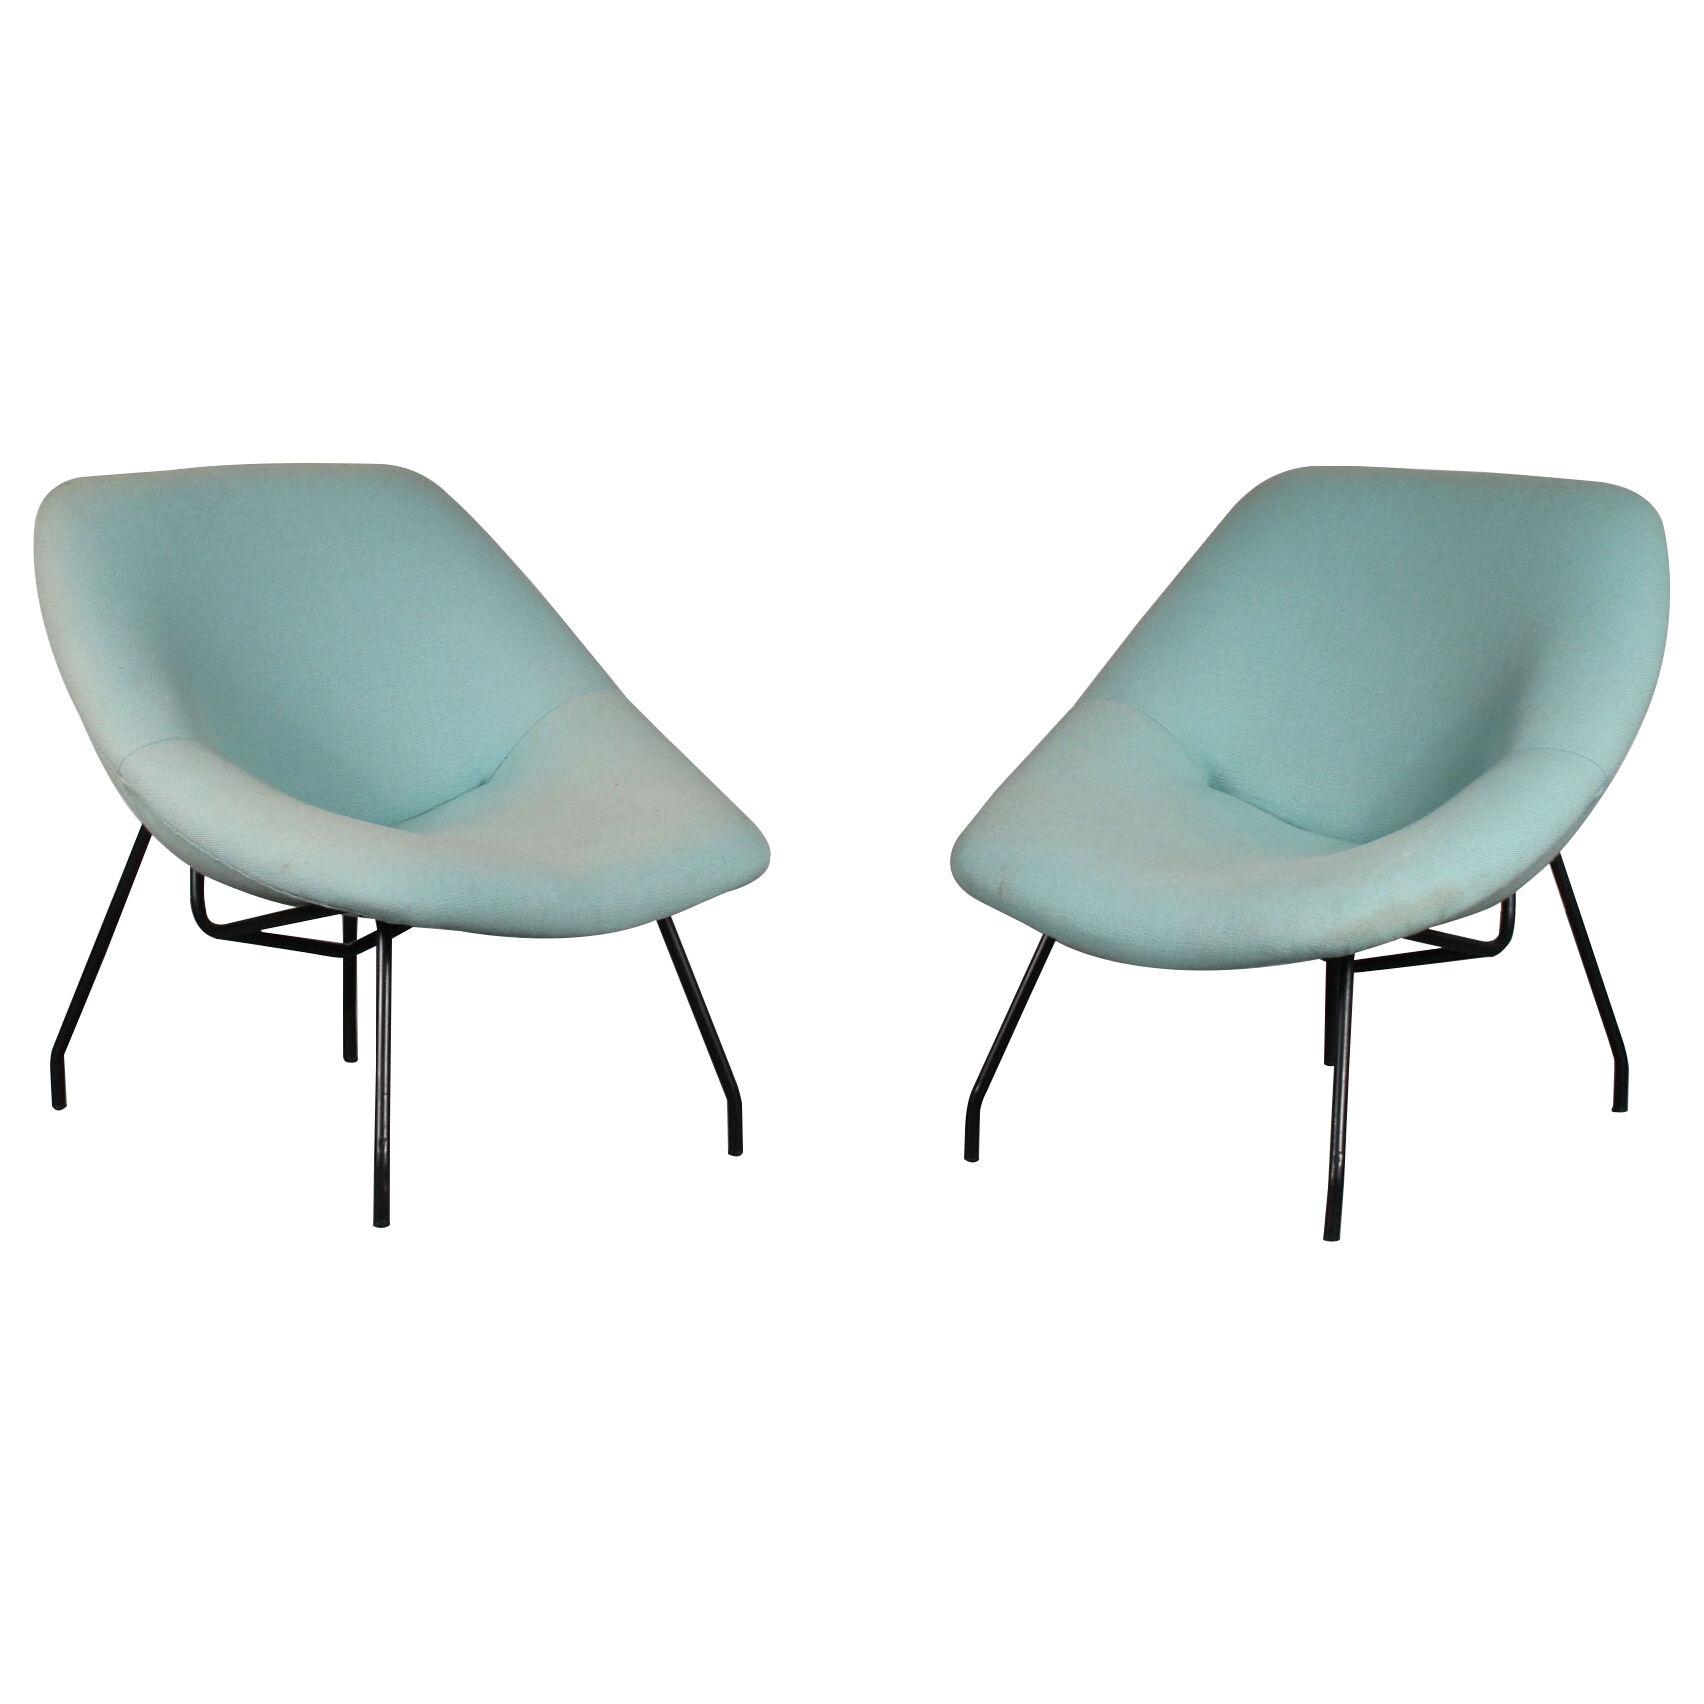 Rare Pair of Lounge Chairs by GAR, France 1950